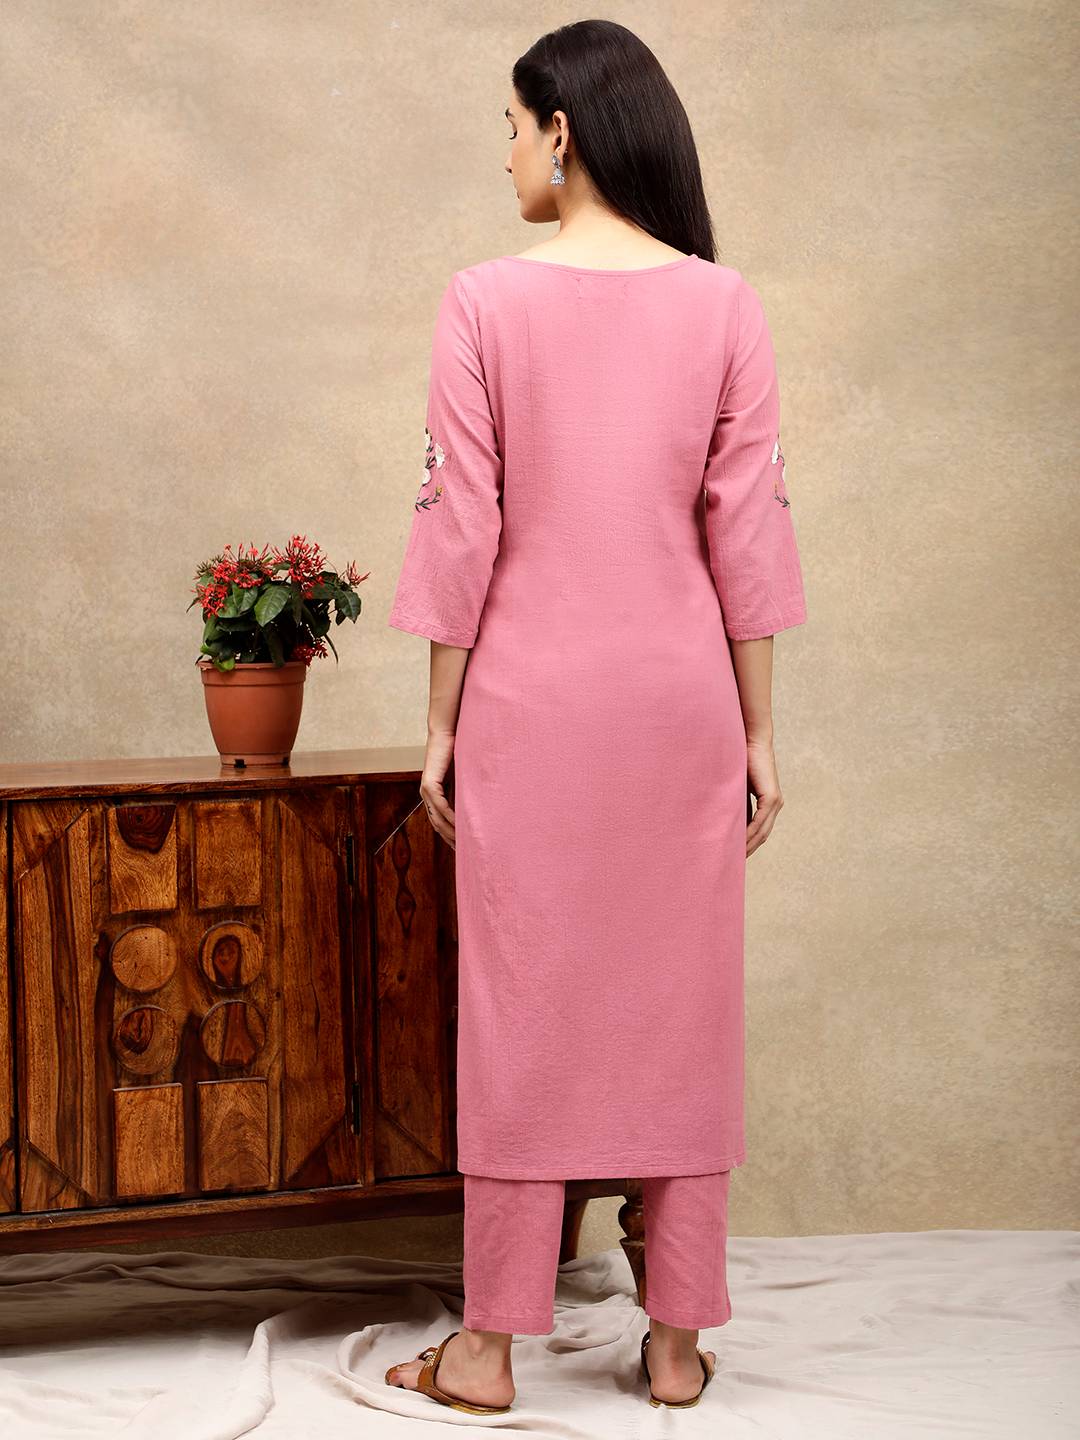 PINK EMBROIDERED KURTA WITH PANTS